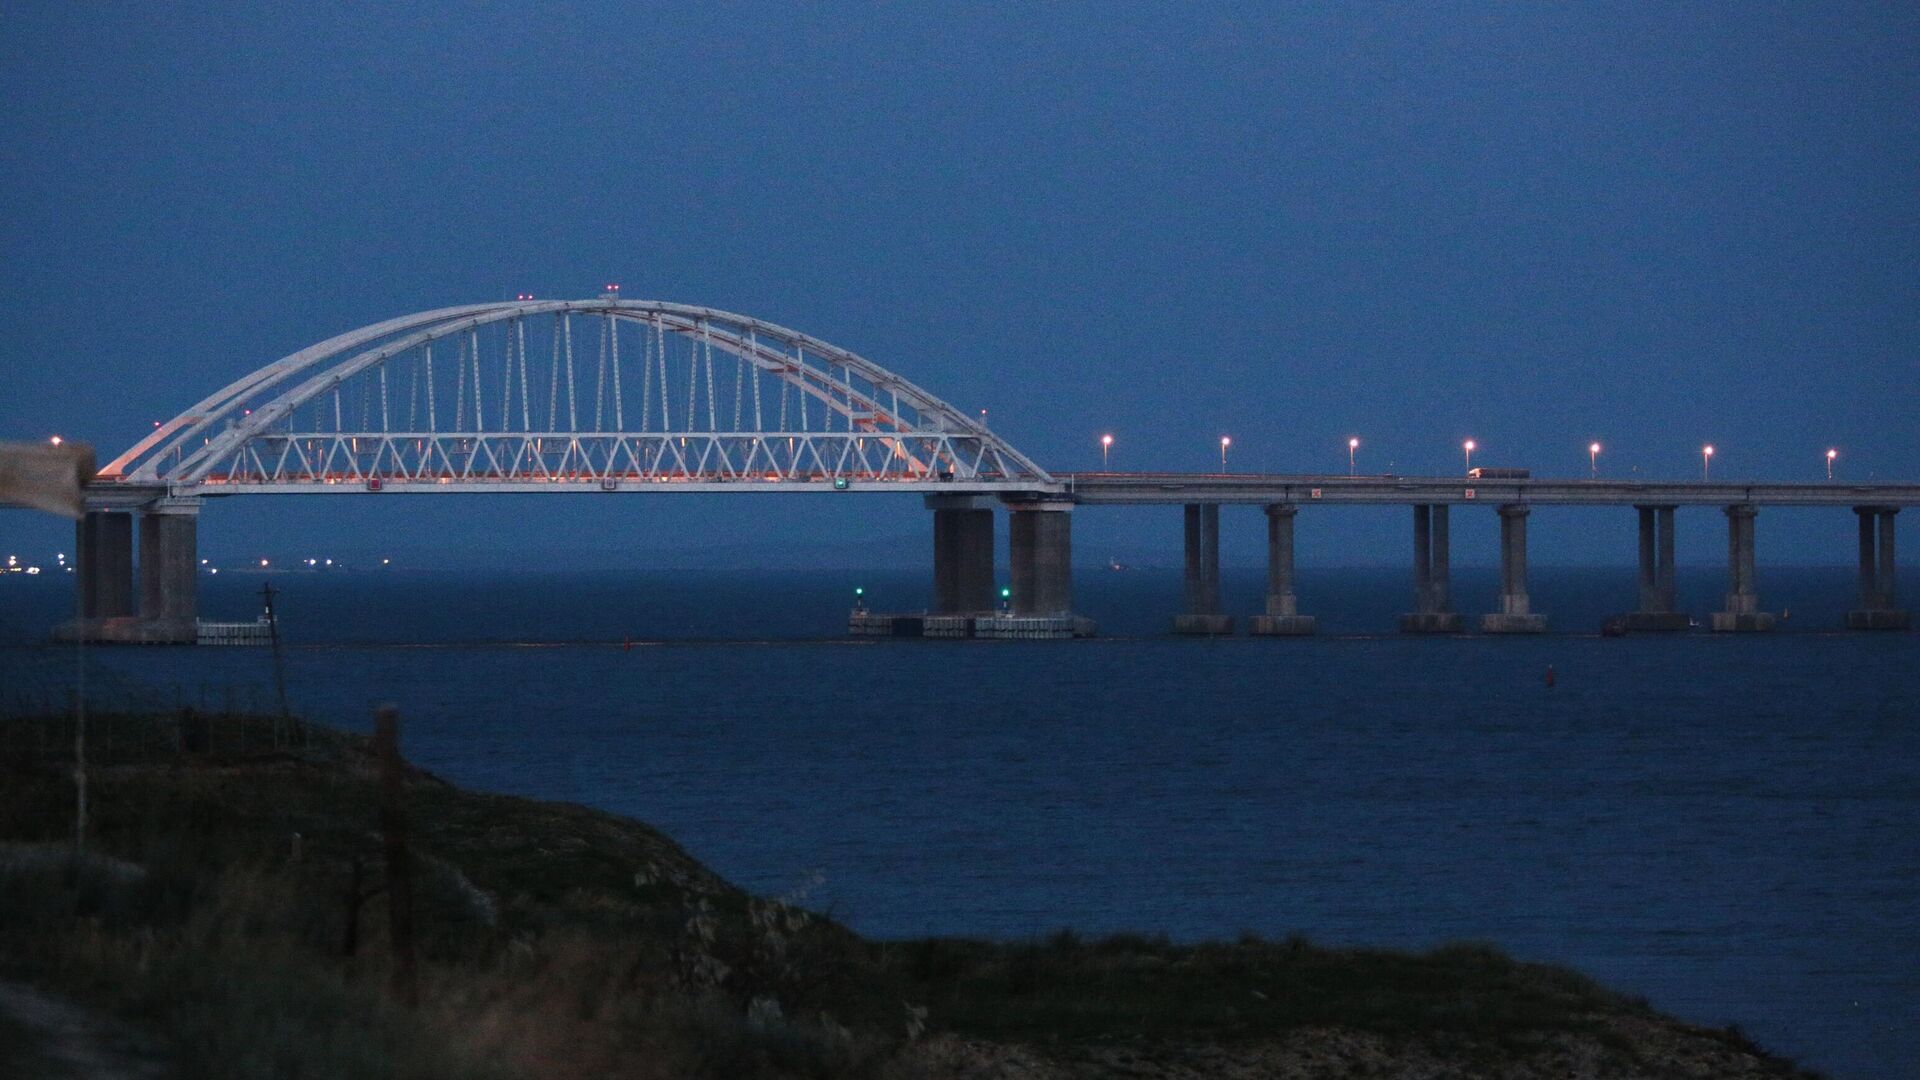 “Main target”: It was requested in England to blow up the Crimean bridge